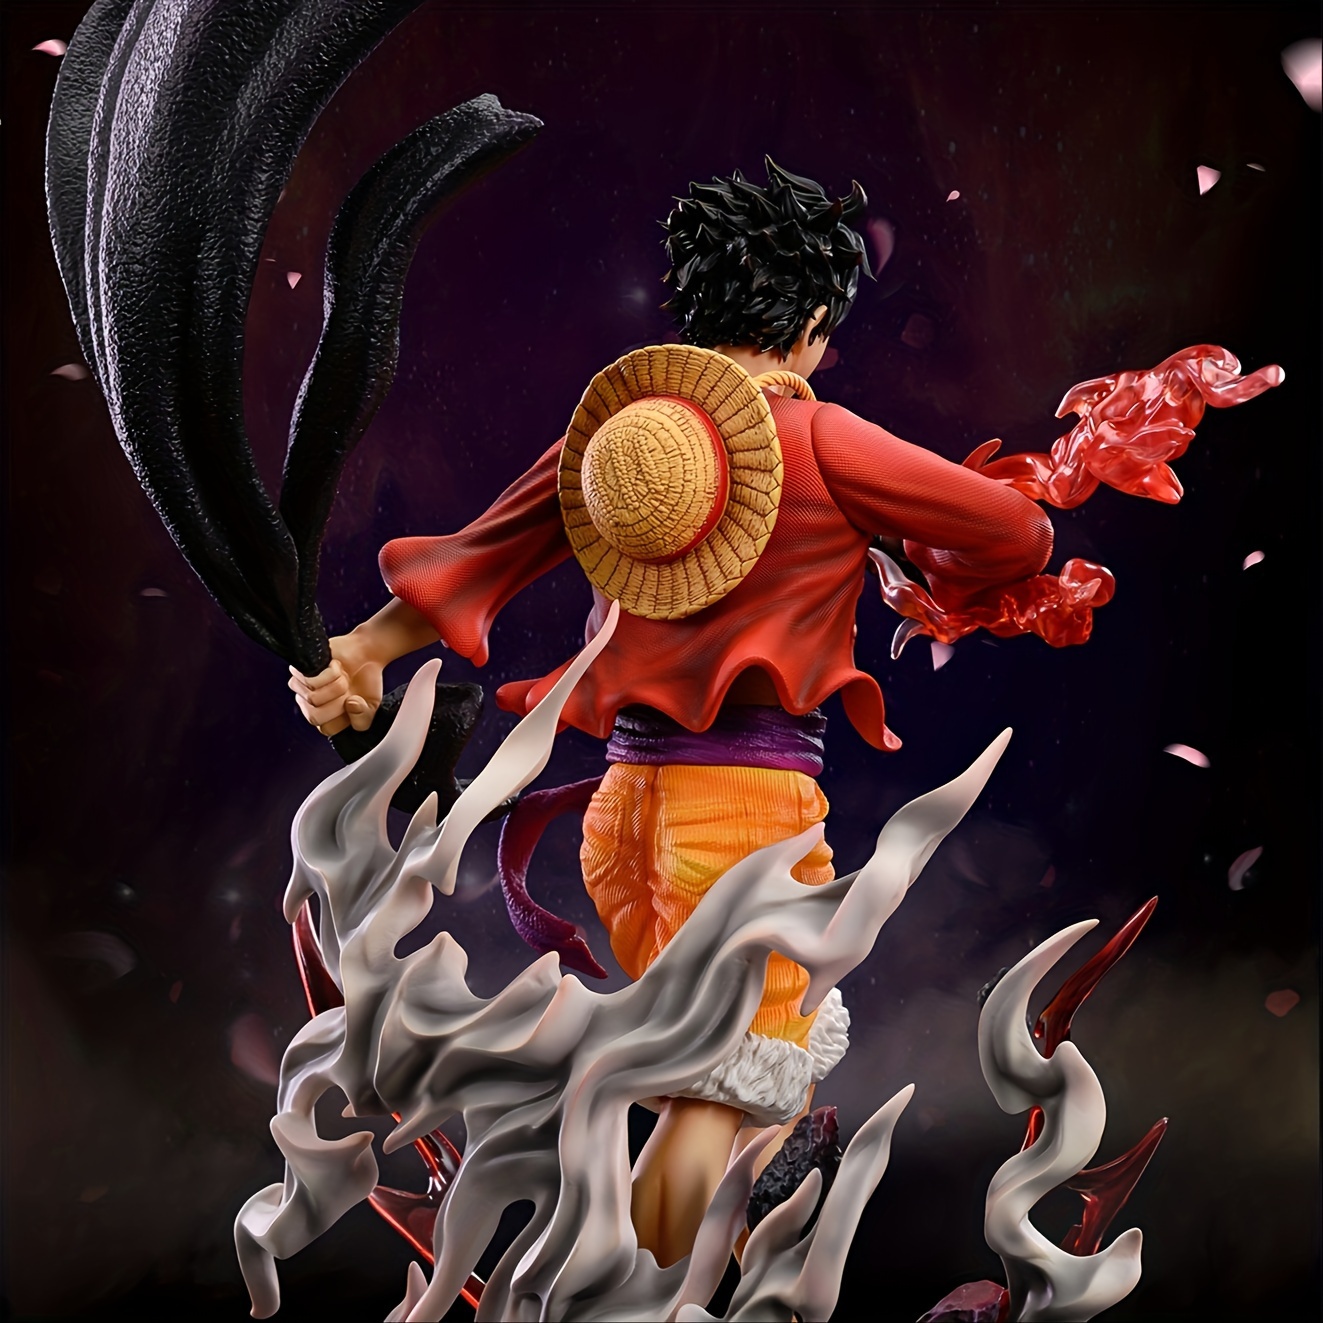 MASEKE Luffy Figure, One Piece Figure, Anime Figure, Gear 5 Luffy Action  Figure Collection Statue Doll Toy Gift